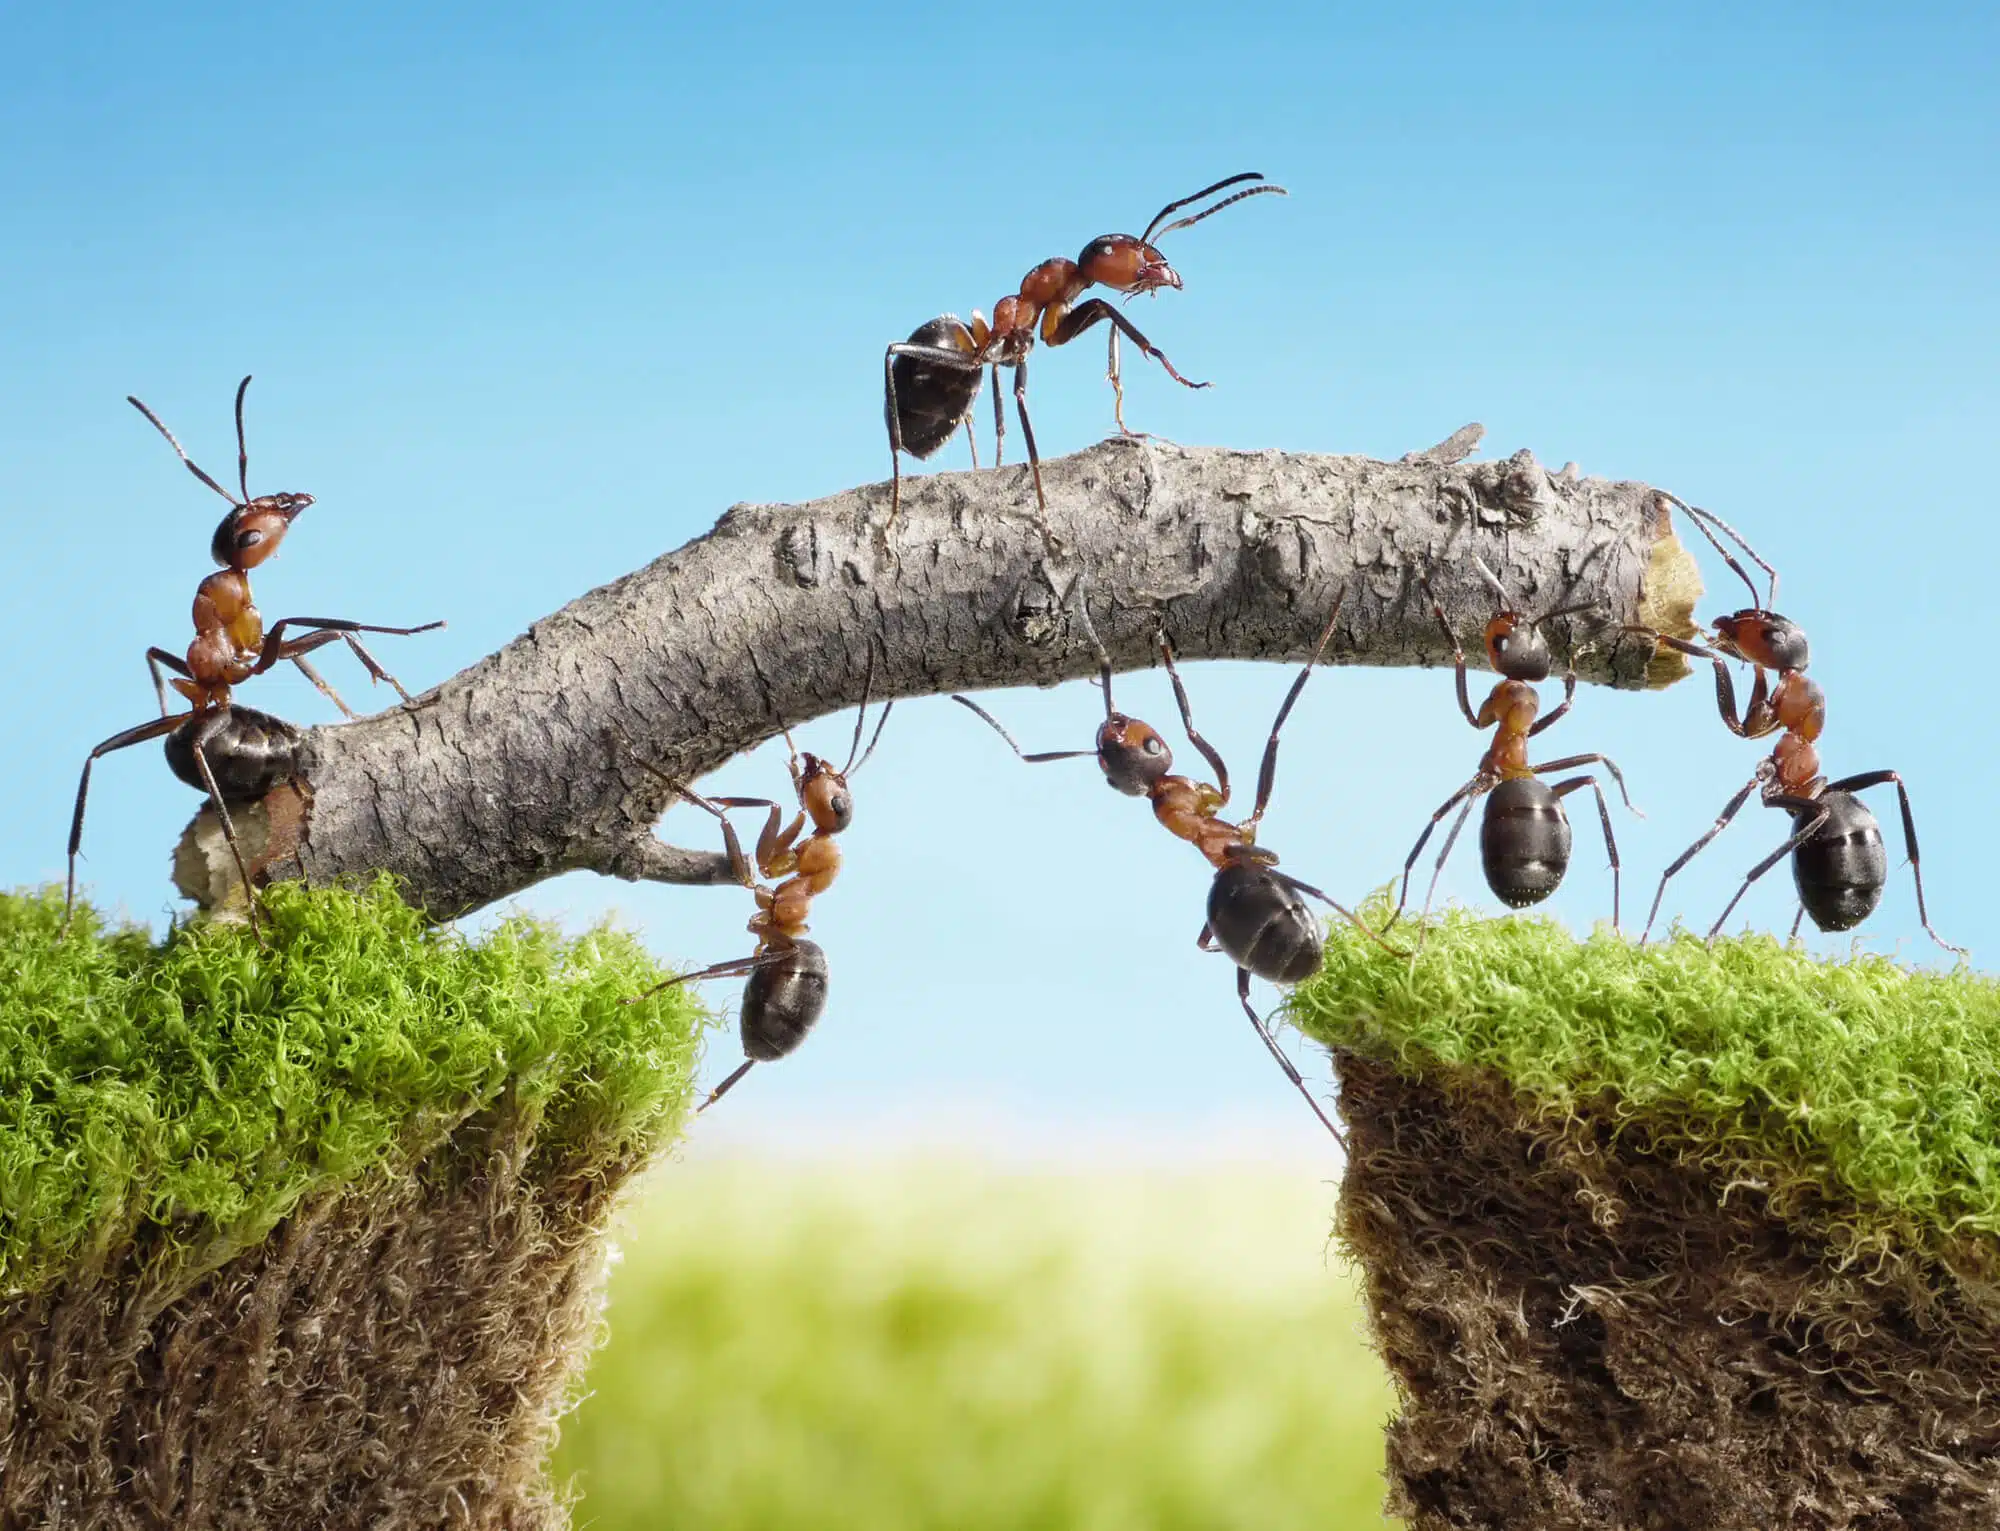 Ants build a bridge by working together. Illustration: depositphotos.com